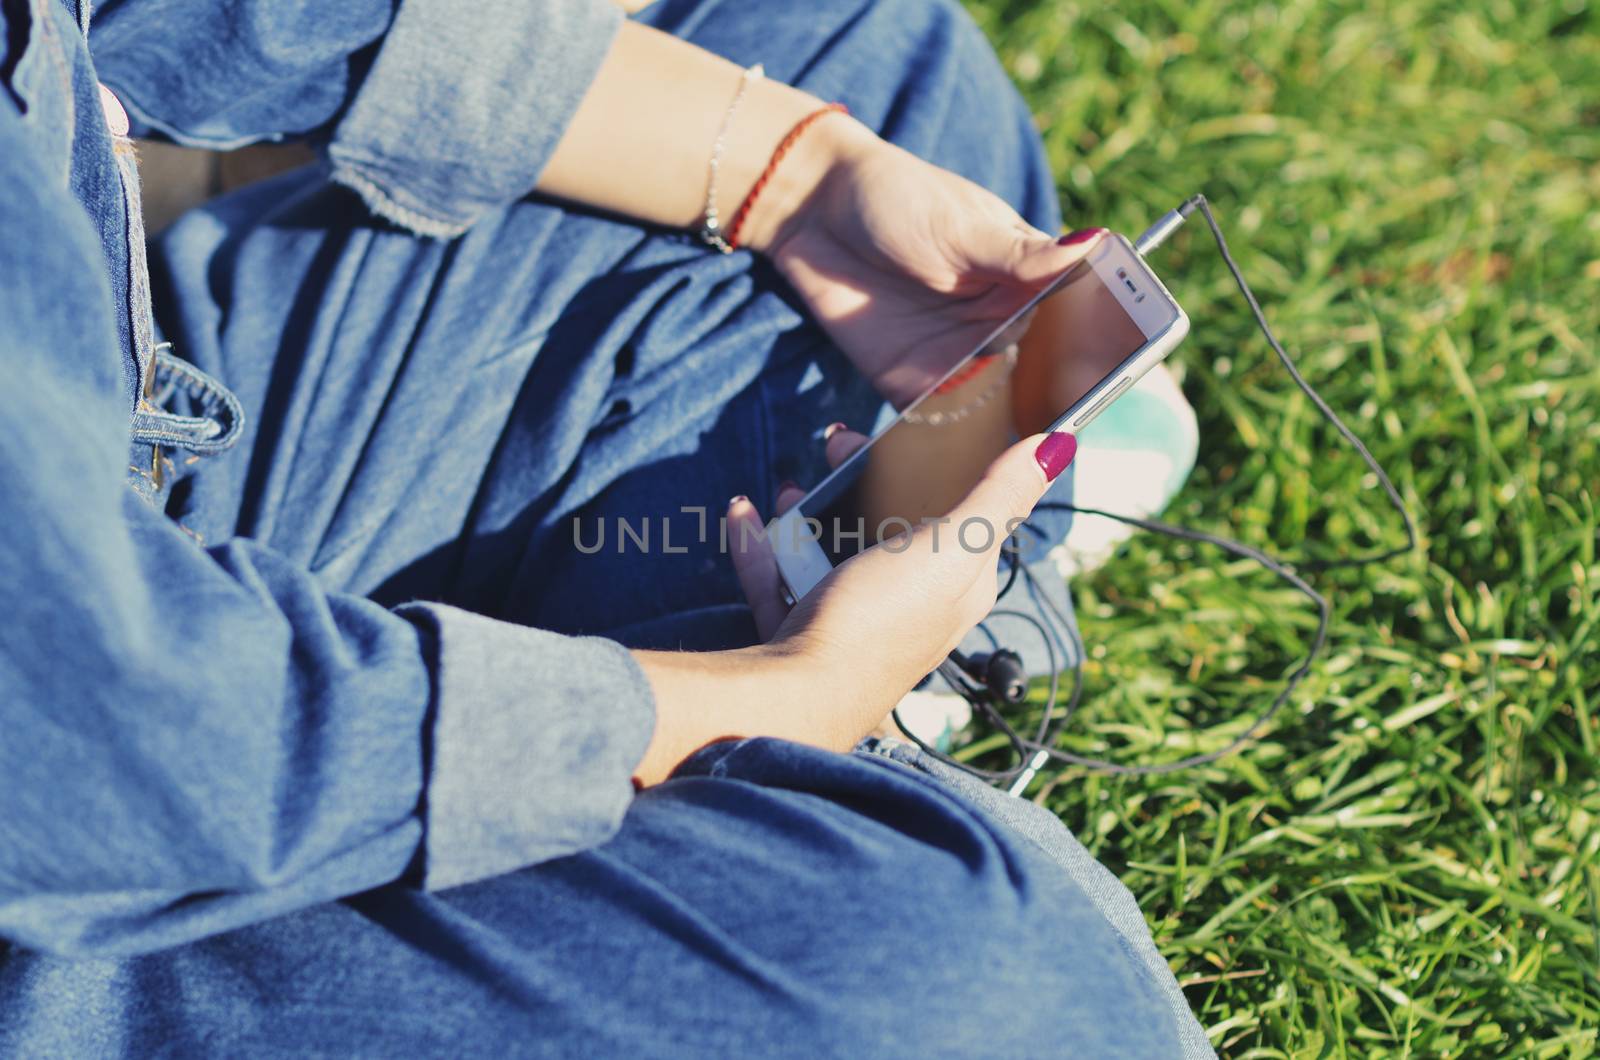 Hands of a young girl who holds a smartphone and sits on the green grass, close-up